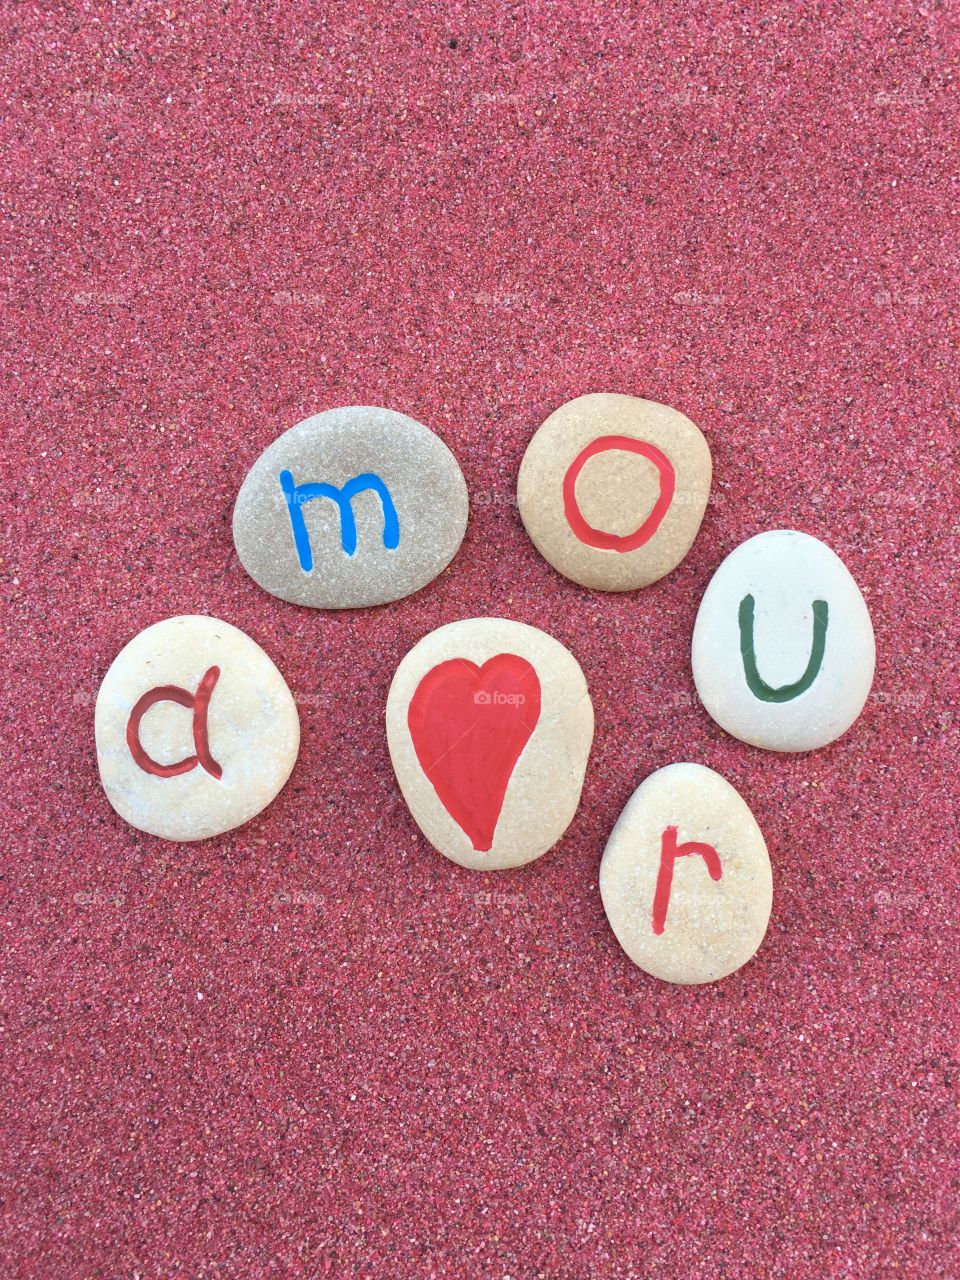 Amour message on stones